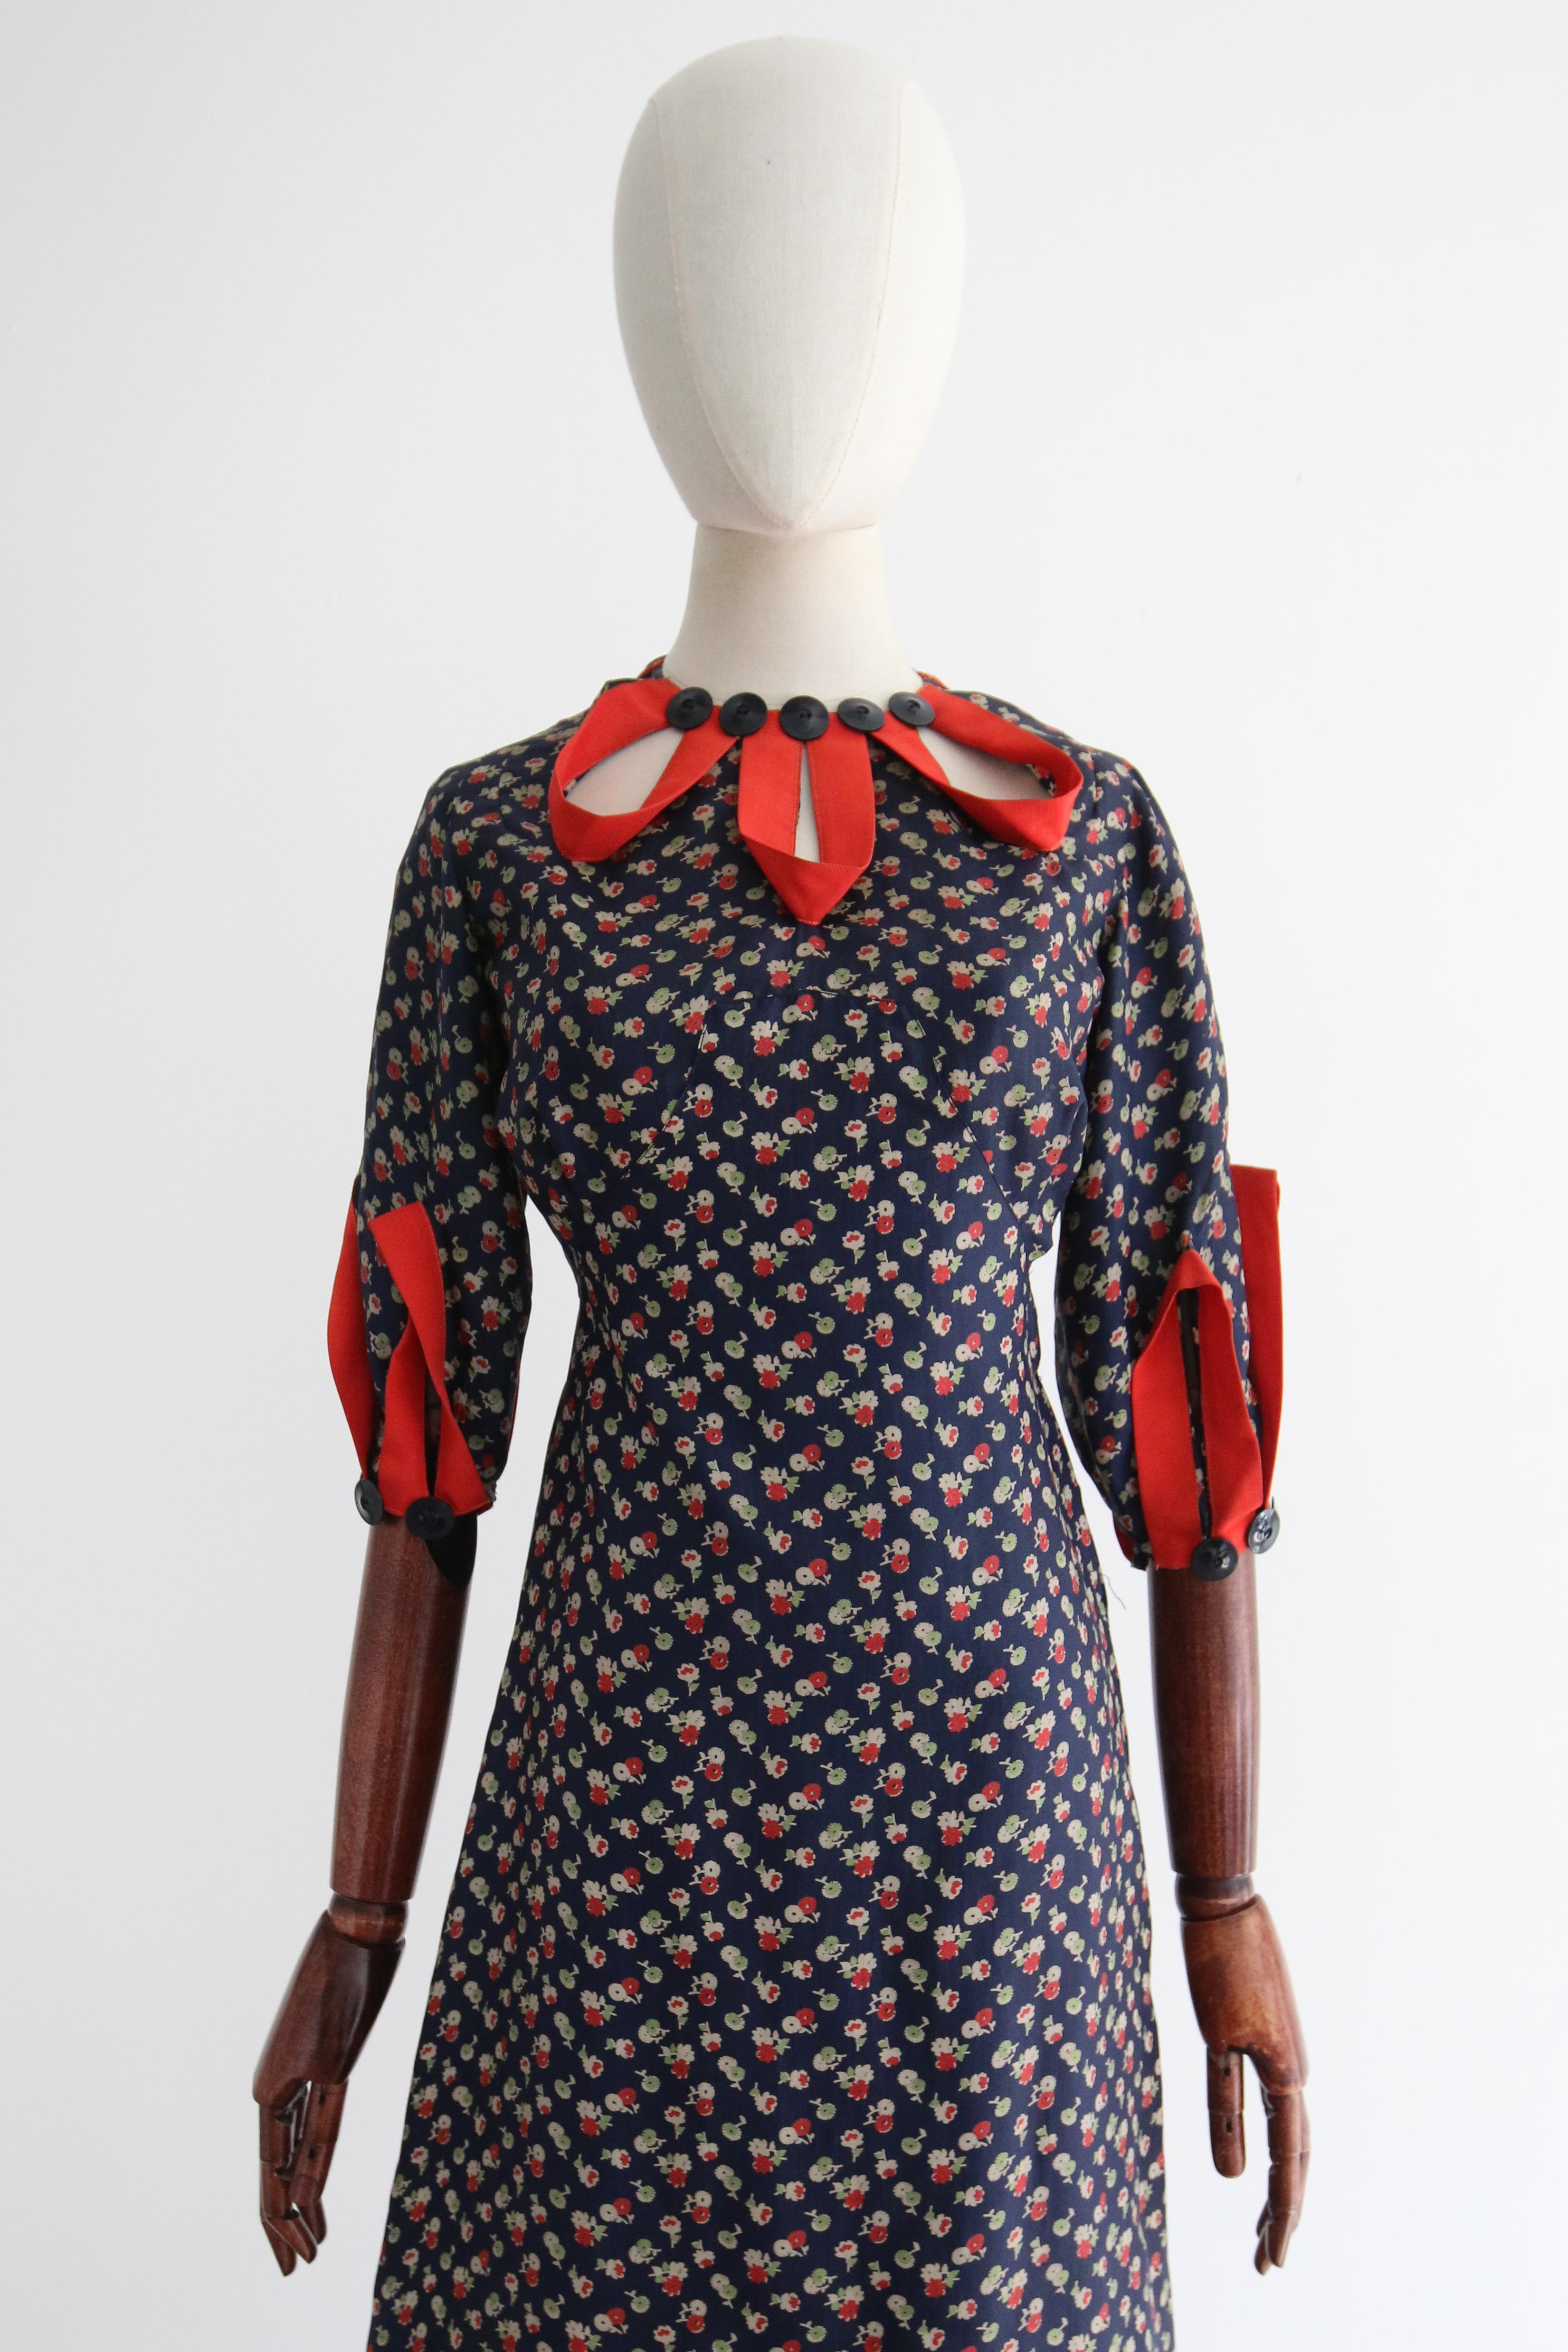 A marvel of its time, this original 1930's blue twill silk dress with a floral pattern in shades of grey, green and red, finished with red faille ribbon details and navy blue buttons, is a rare piece to behold. 

The rounded neckline of the dress is